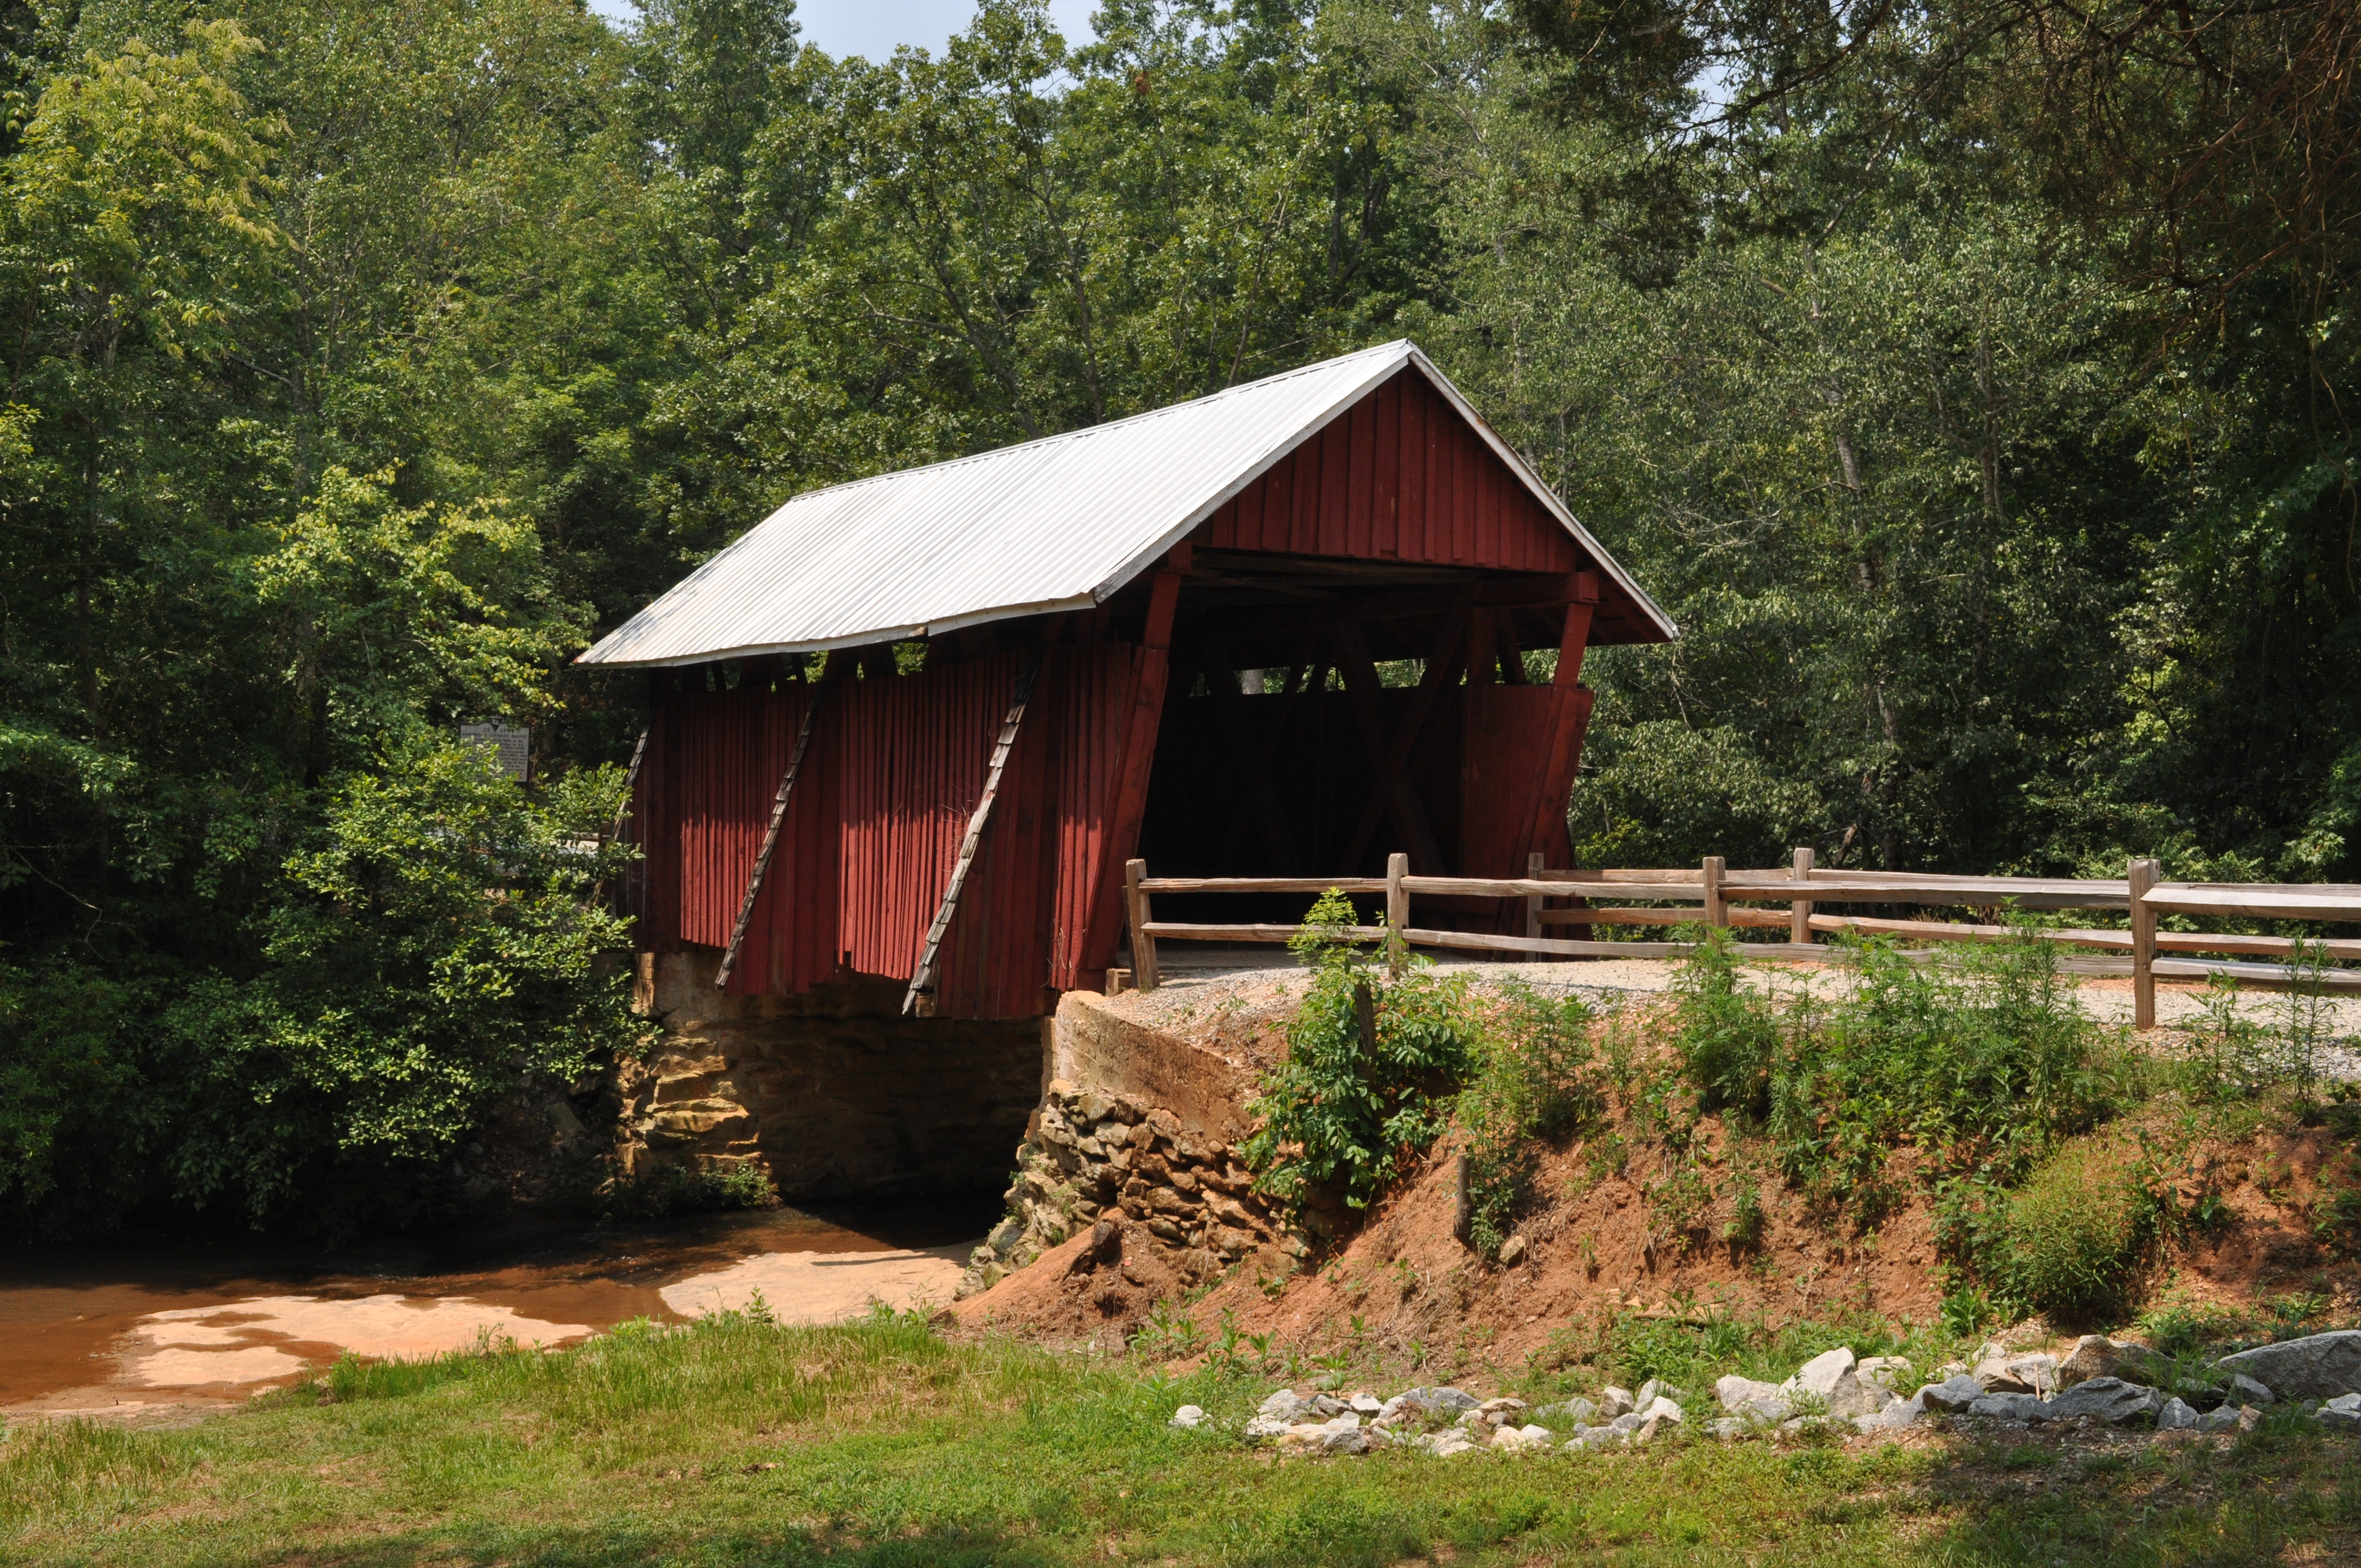 Covered Bridge Pics, Man Made Collection